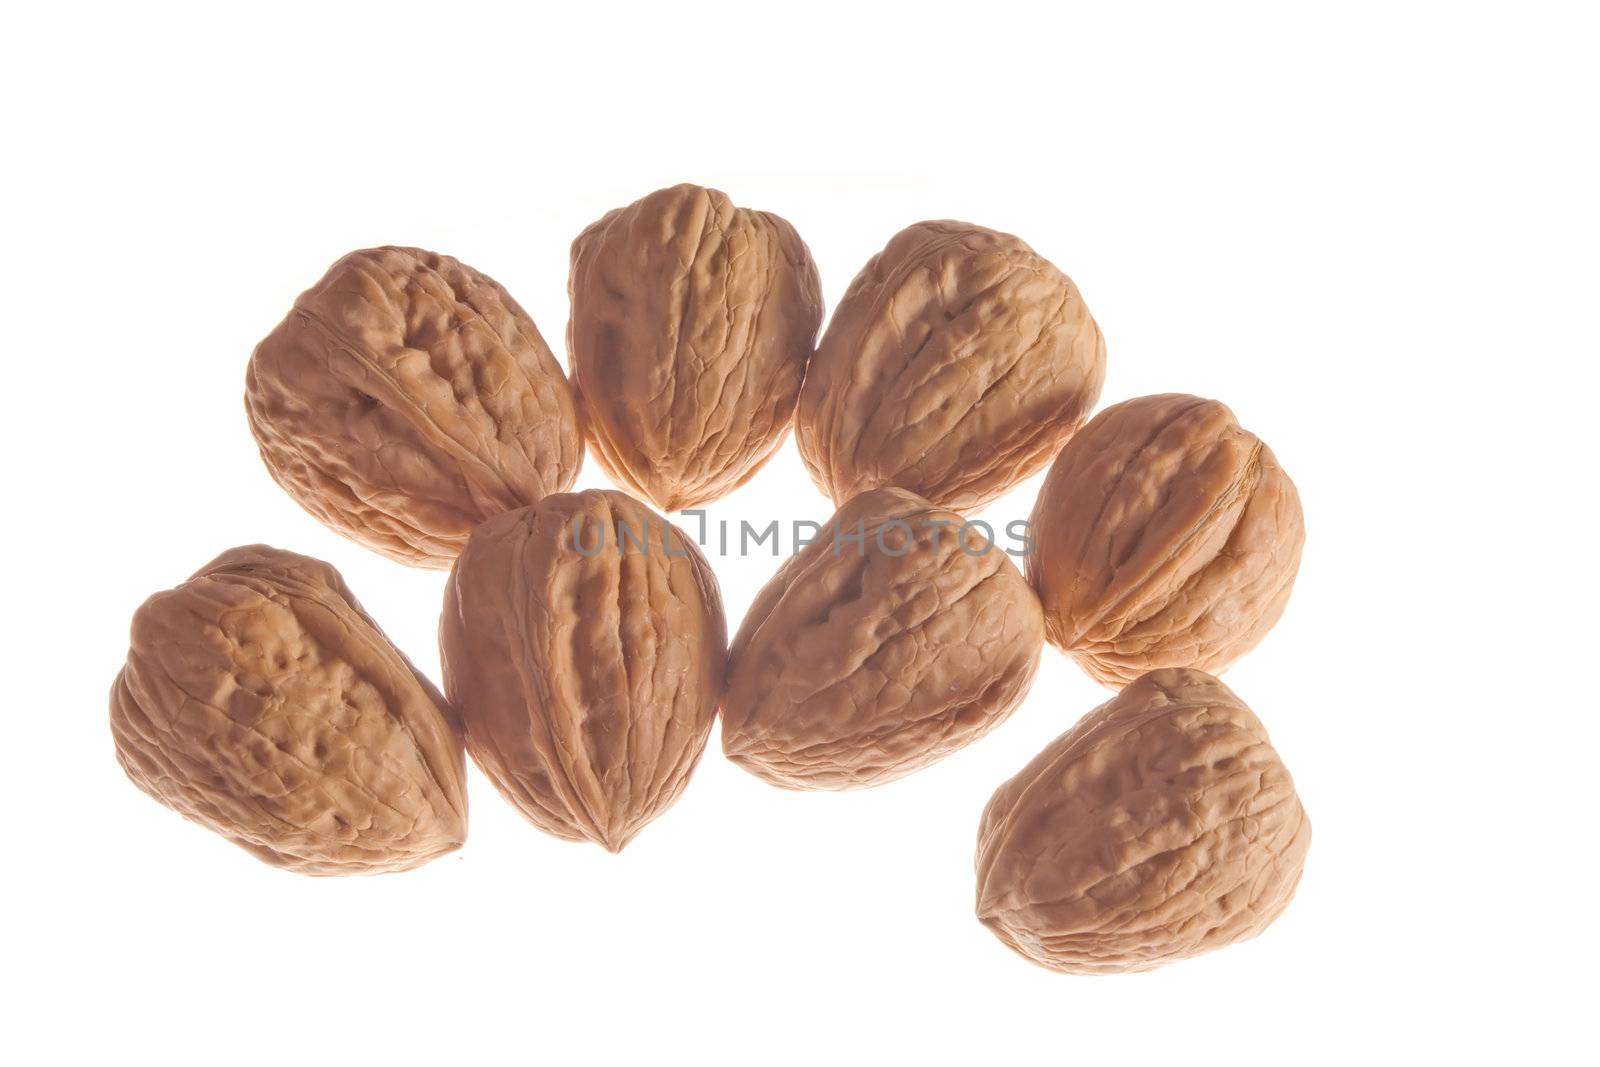 Isolated nuts studio composition on white background